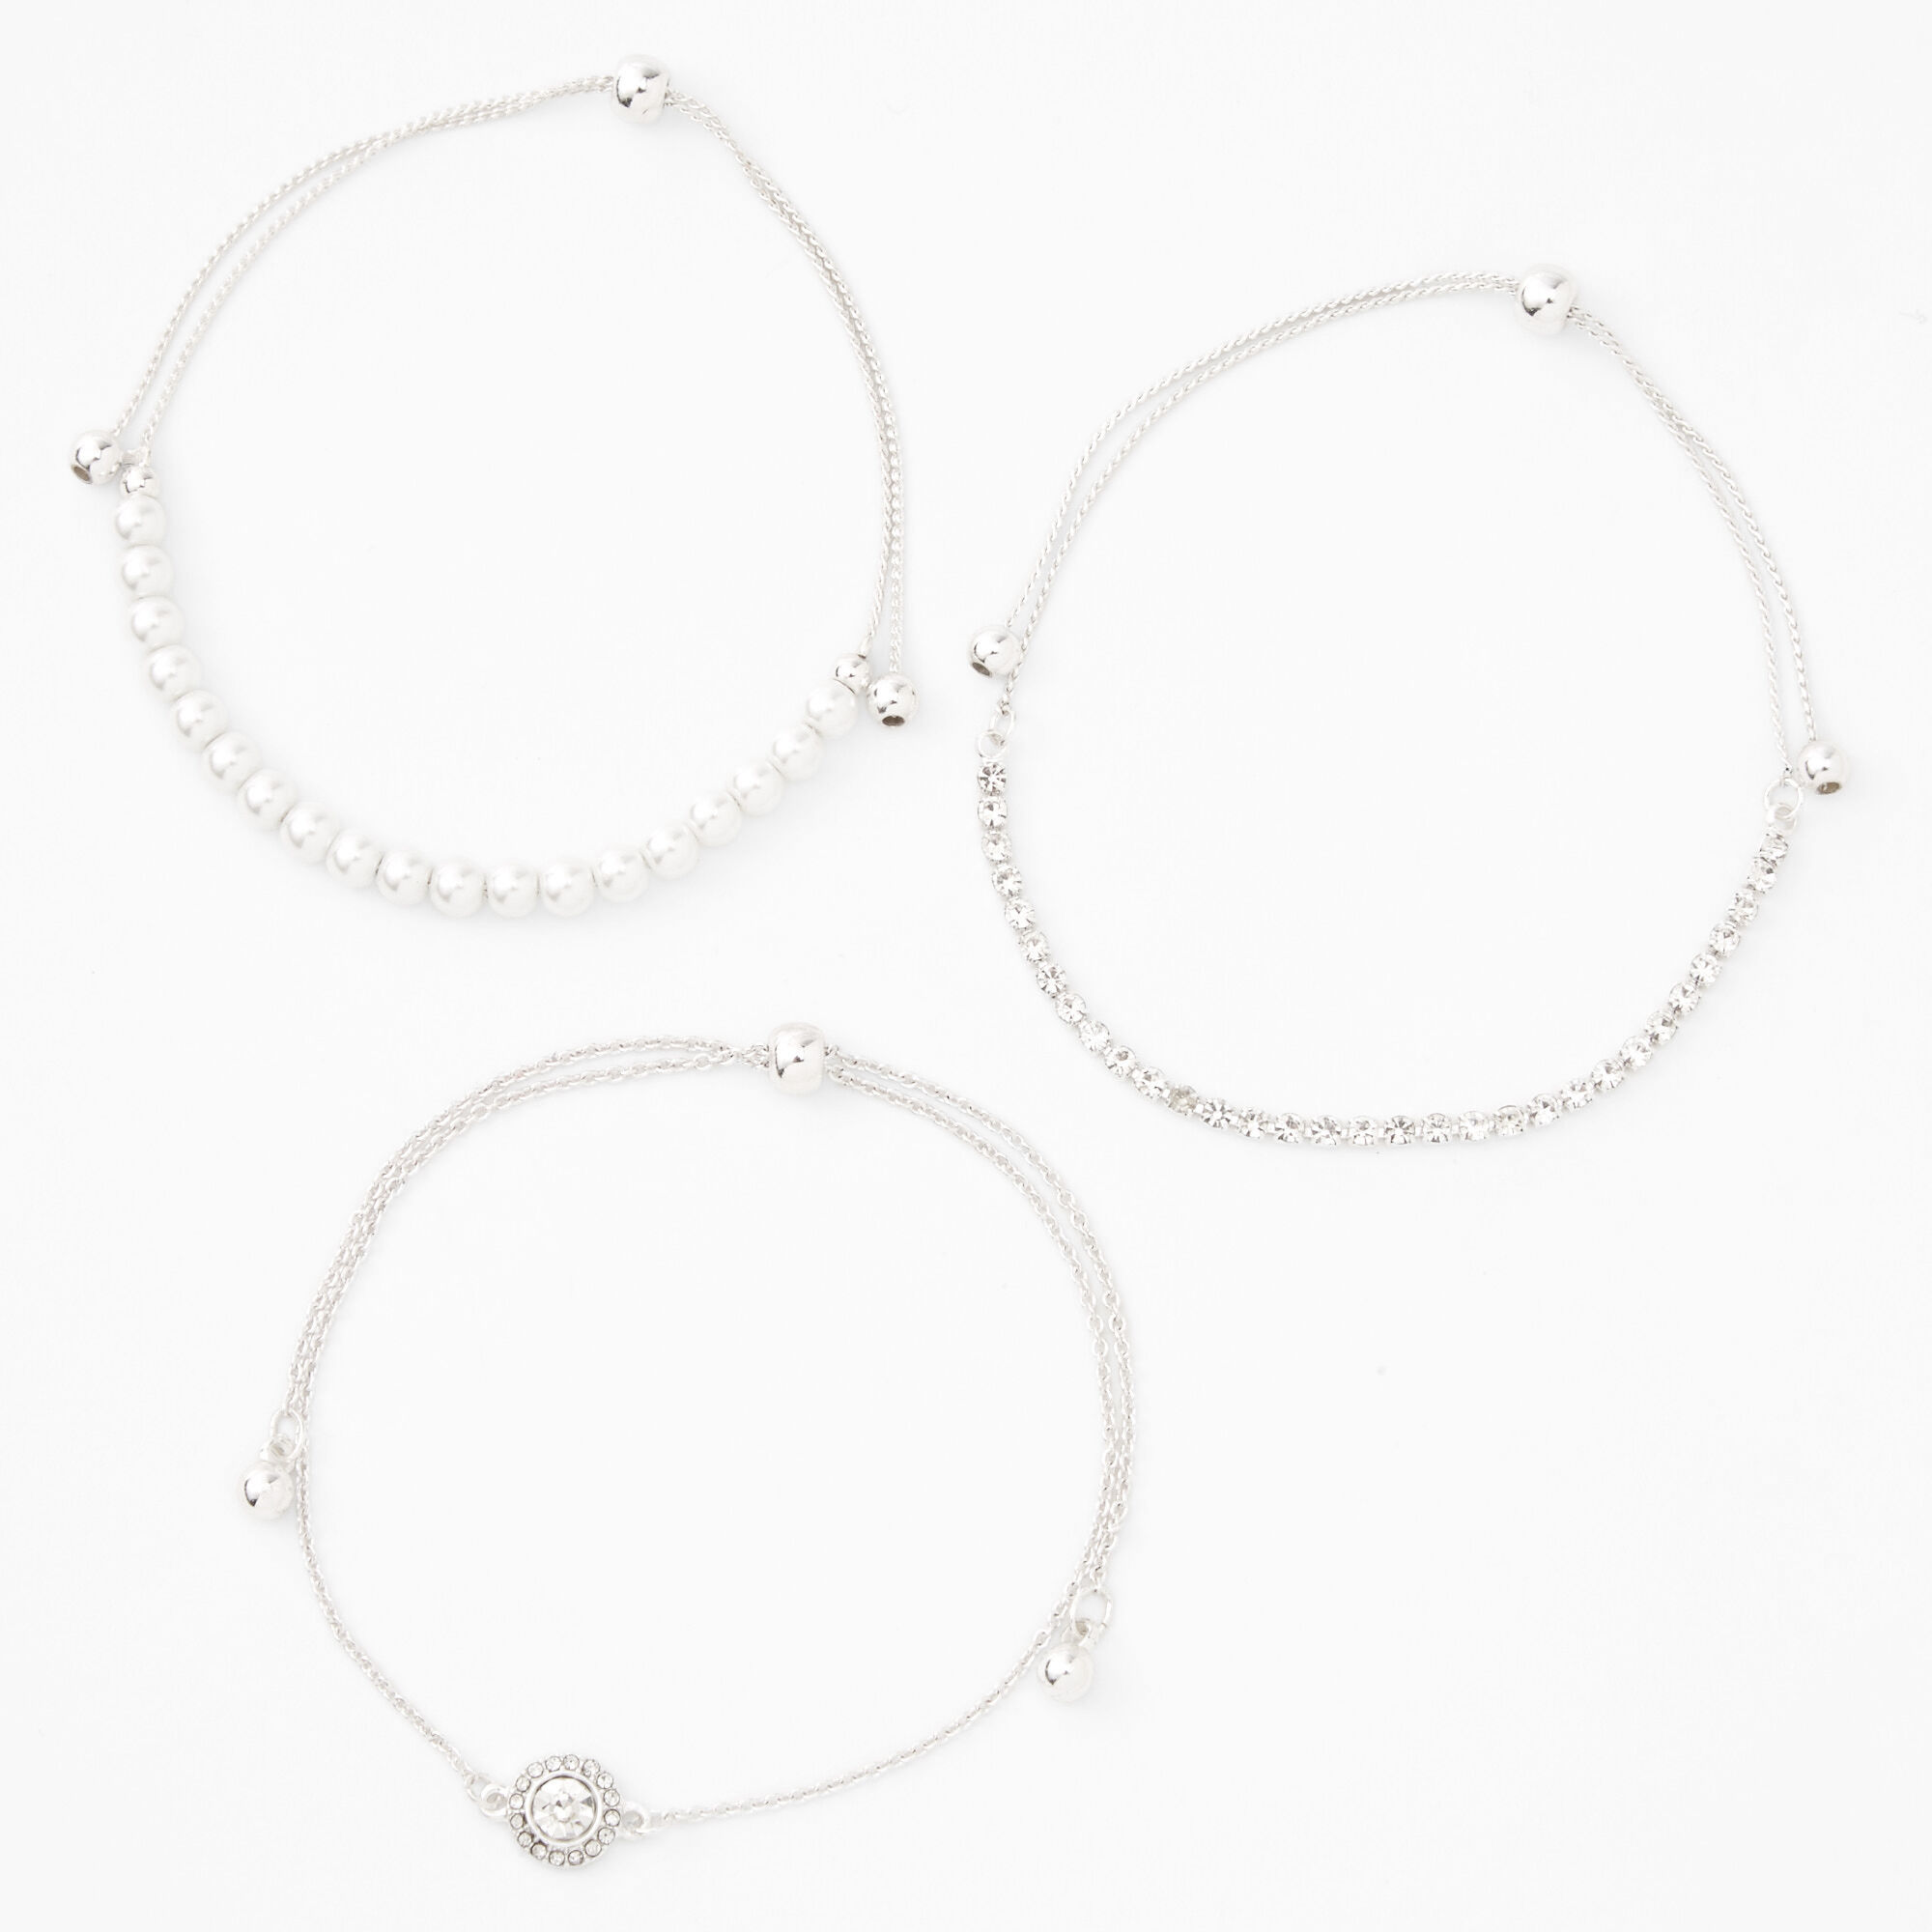 View Claires Tone Pearl Chain Bracelets 3 Pack Silver information